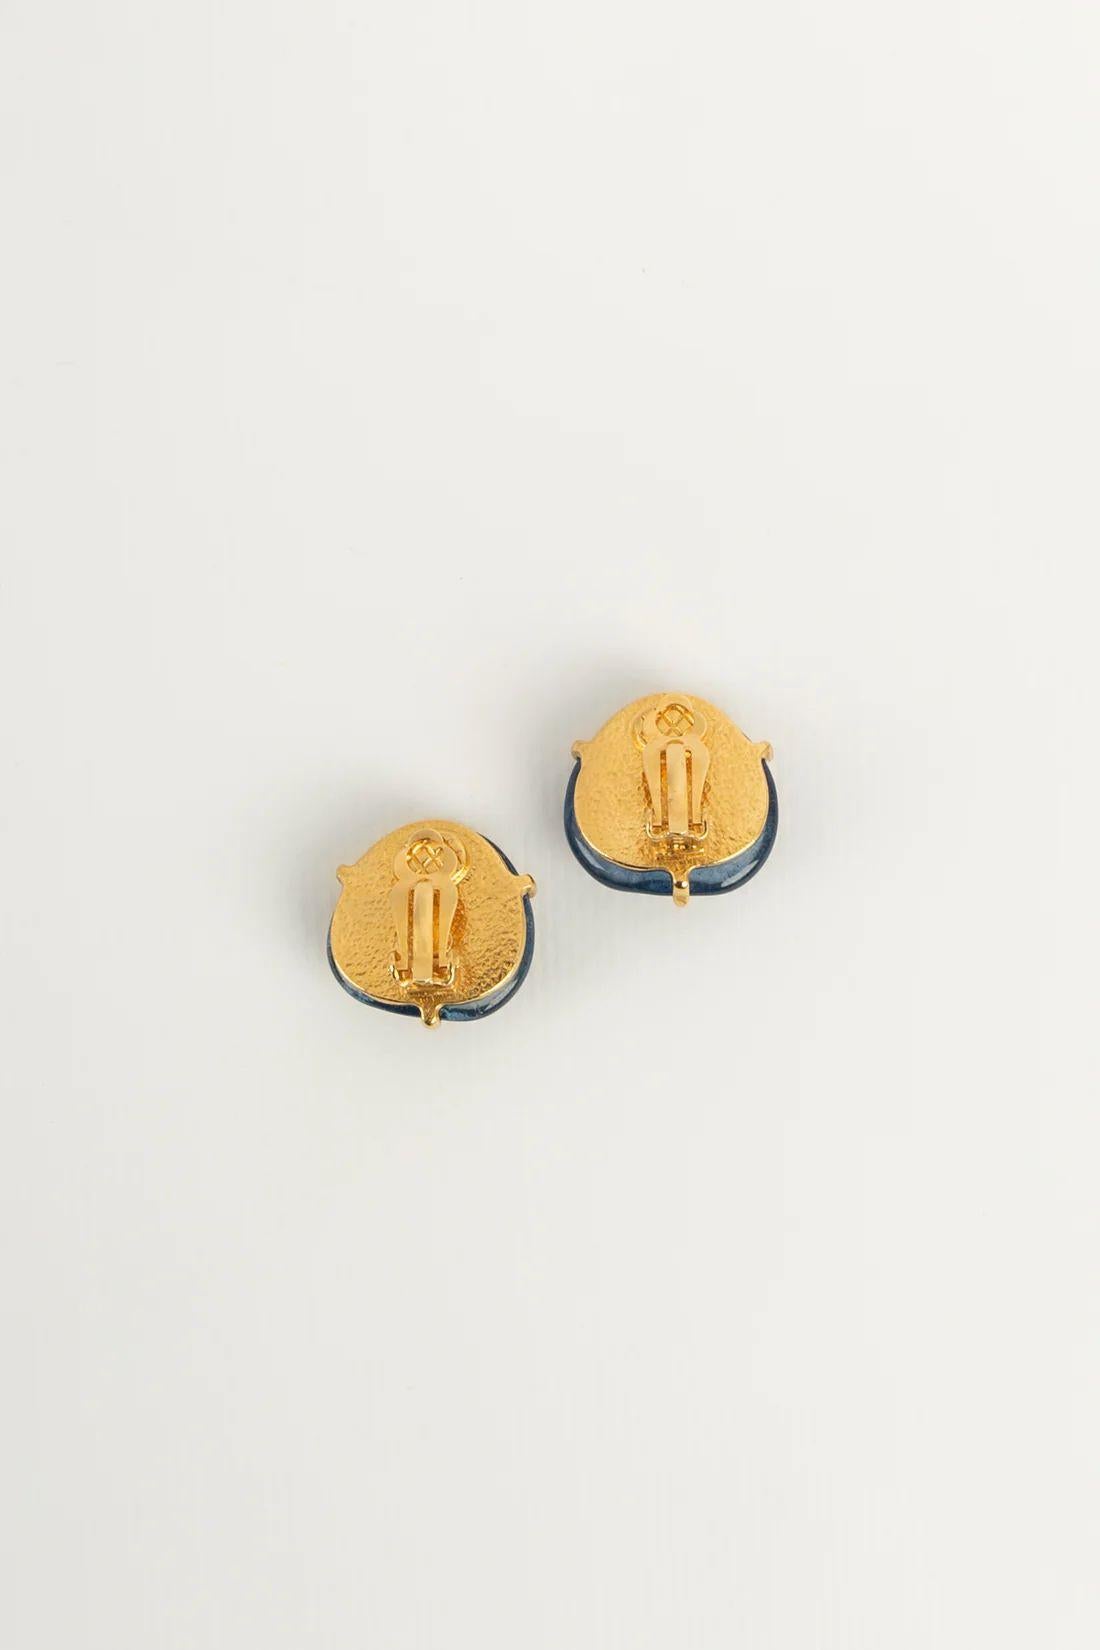 Women's Chanel Earrings Clips in Gilded Metal and Cabochons in Blue Glass Paste For Sale